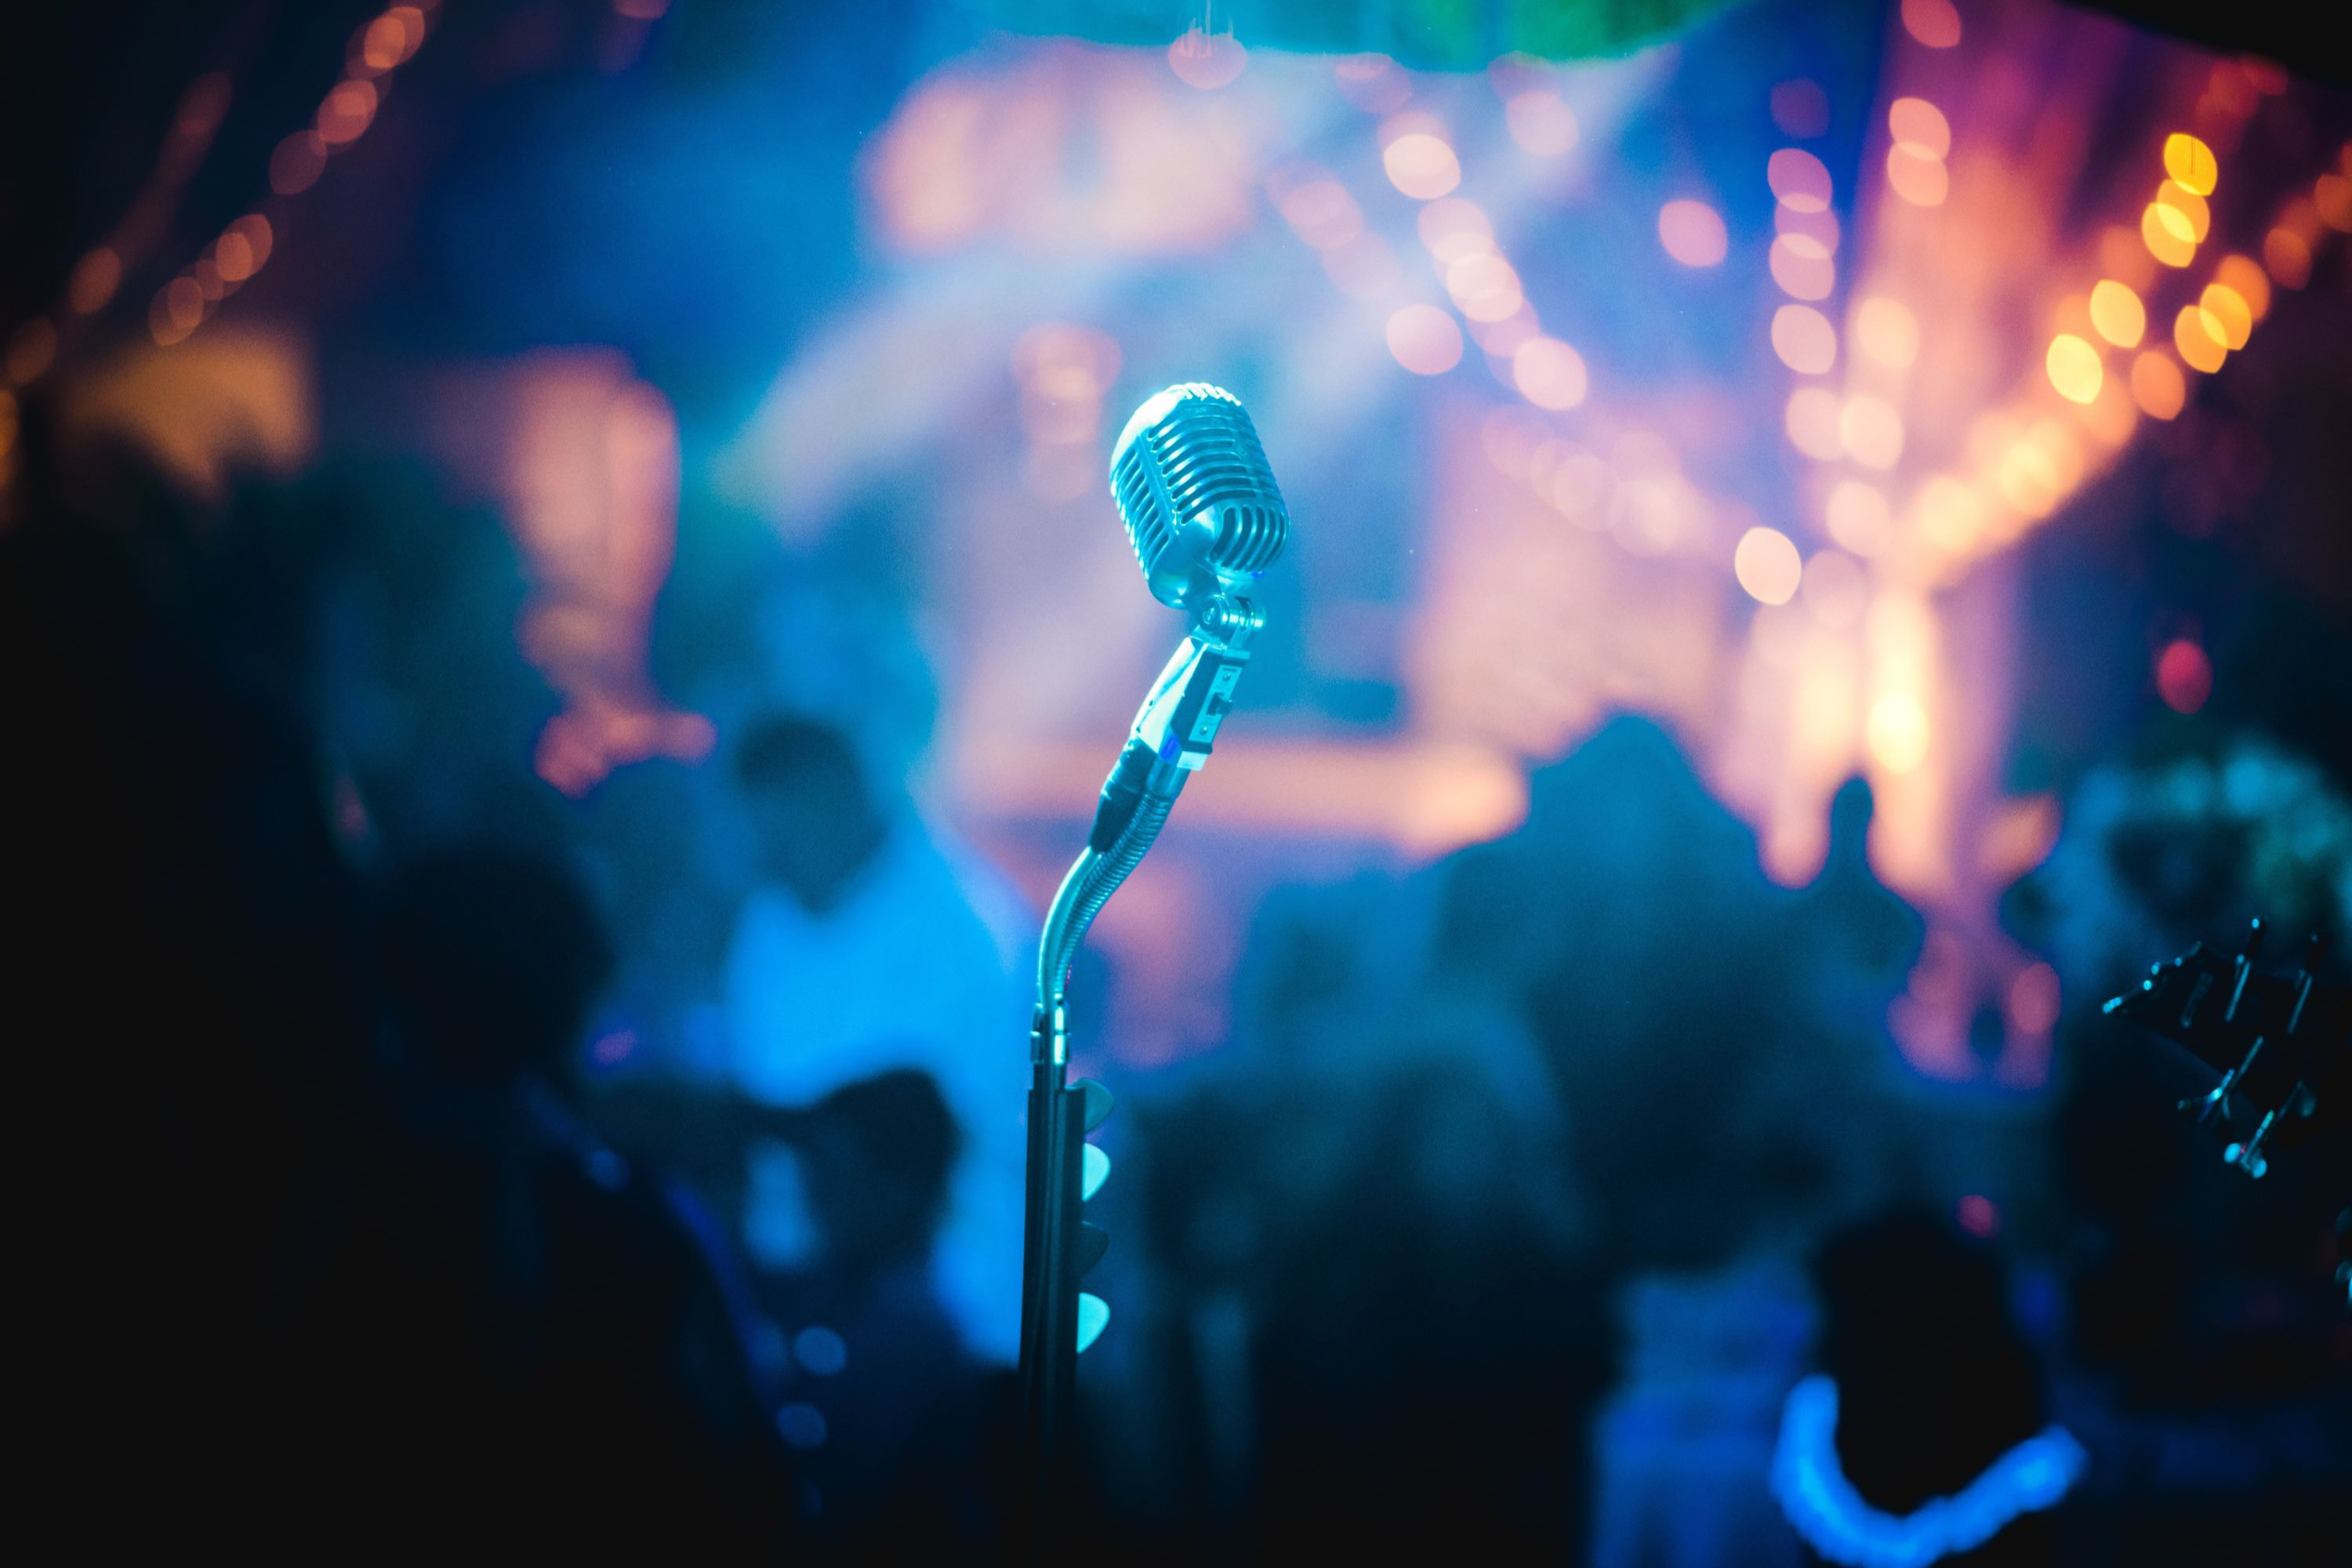 Host the ultimate karaoke party! Tips on setting up, song selection, and making sure everyone has a blast singing their heart out. Let's get the party started!